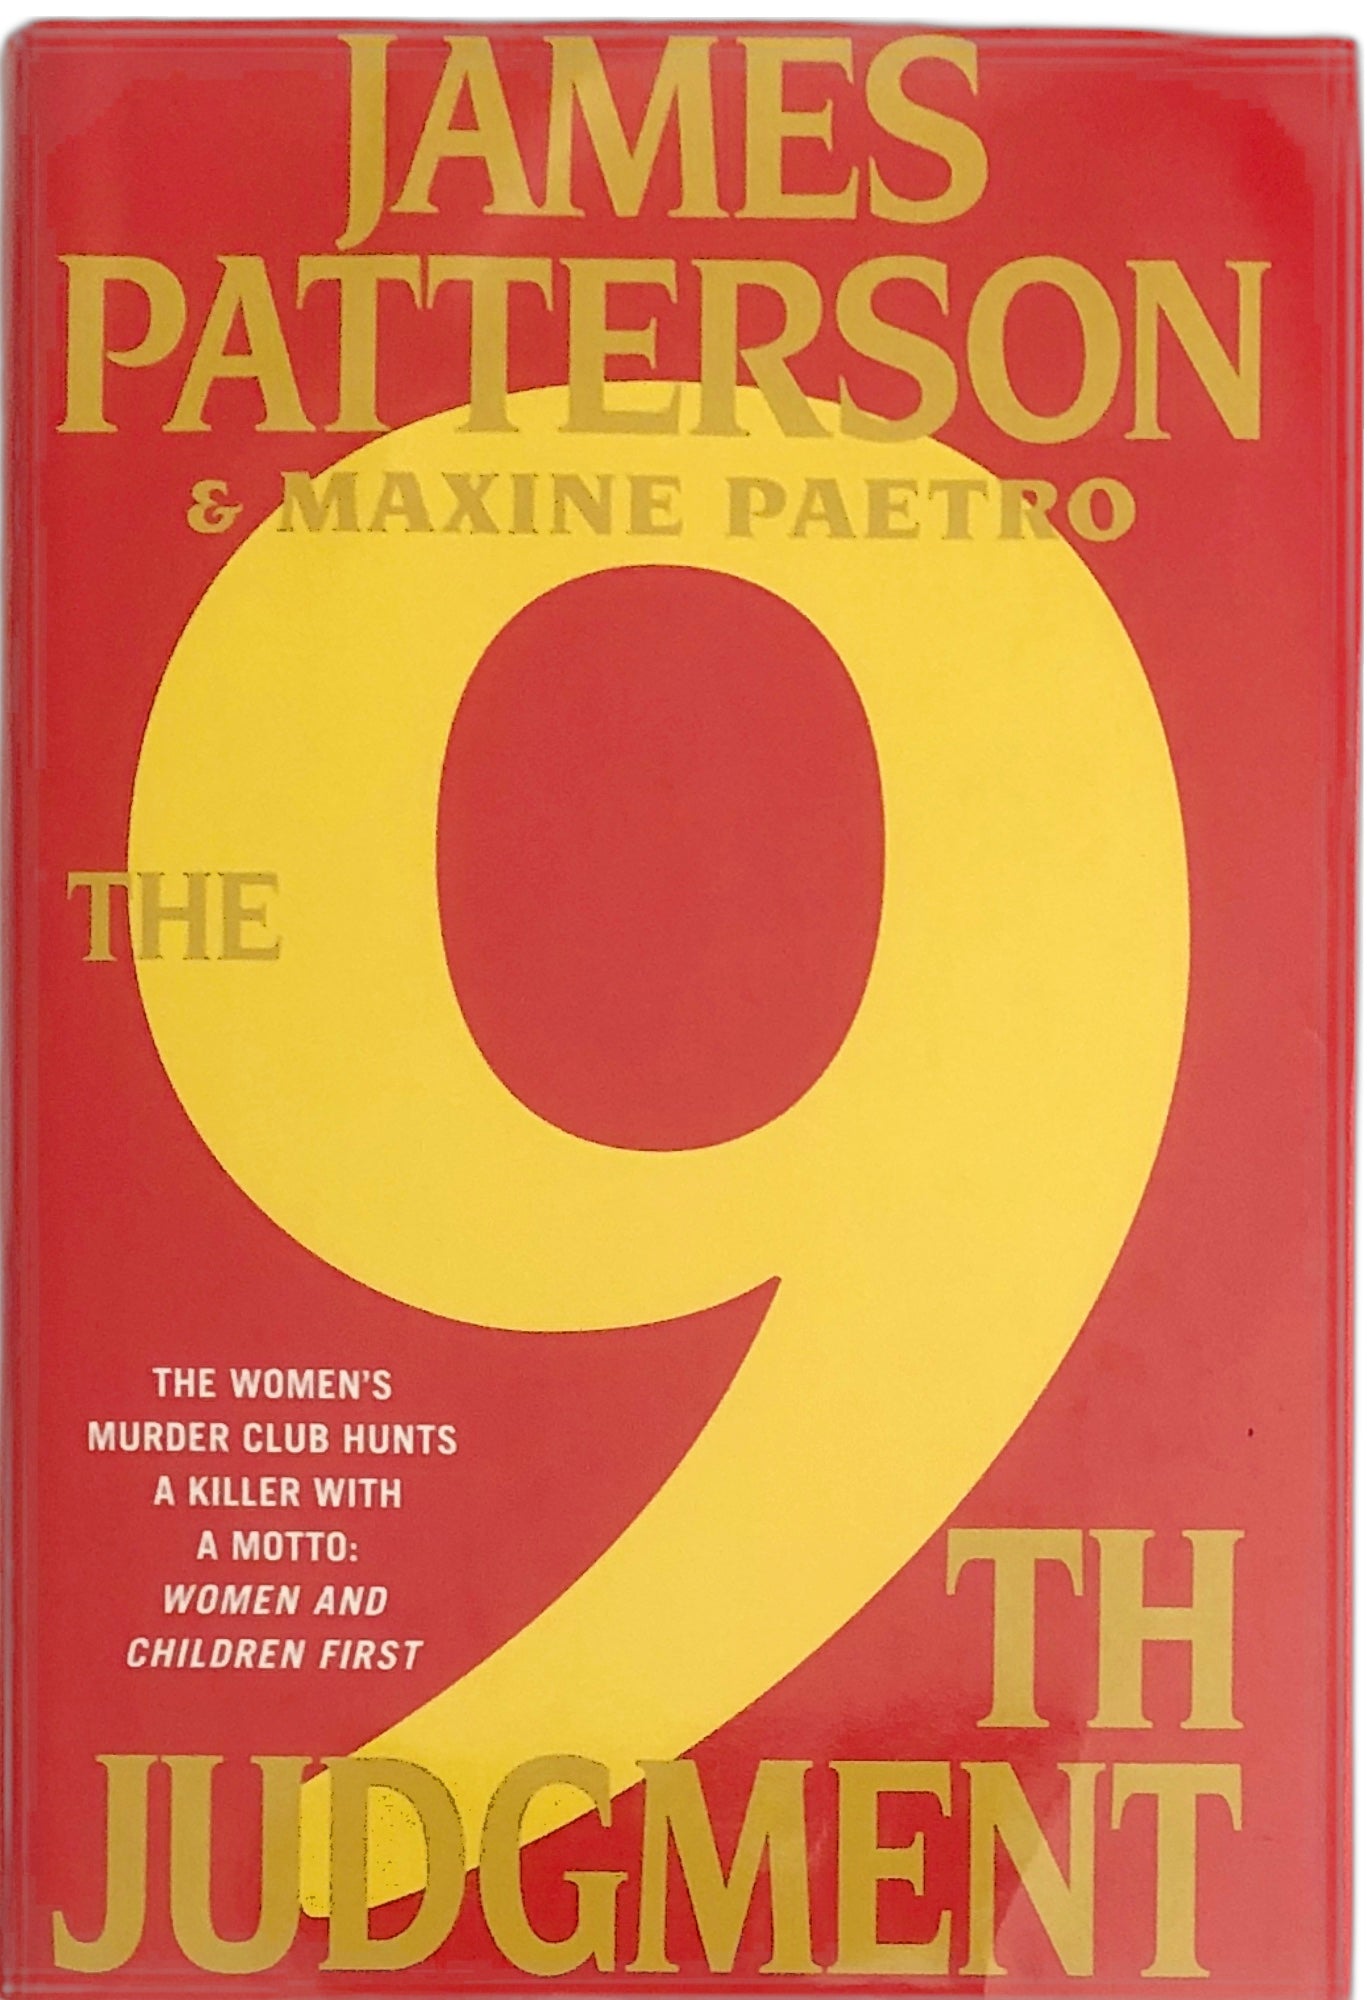 The 9th Judgment by James Patterson & Maxine Paetro